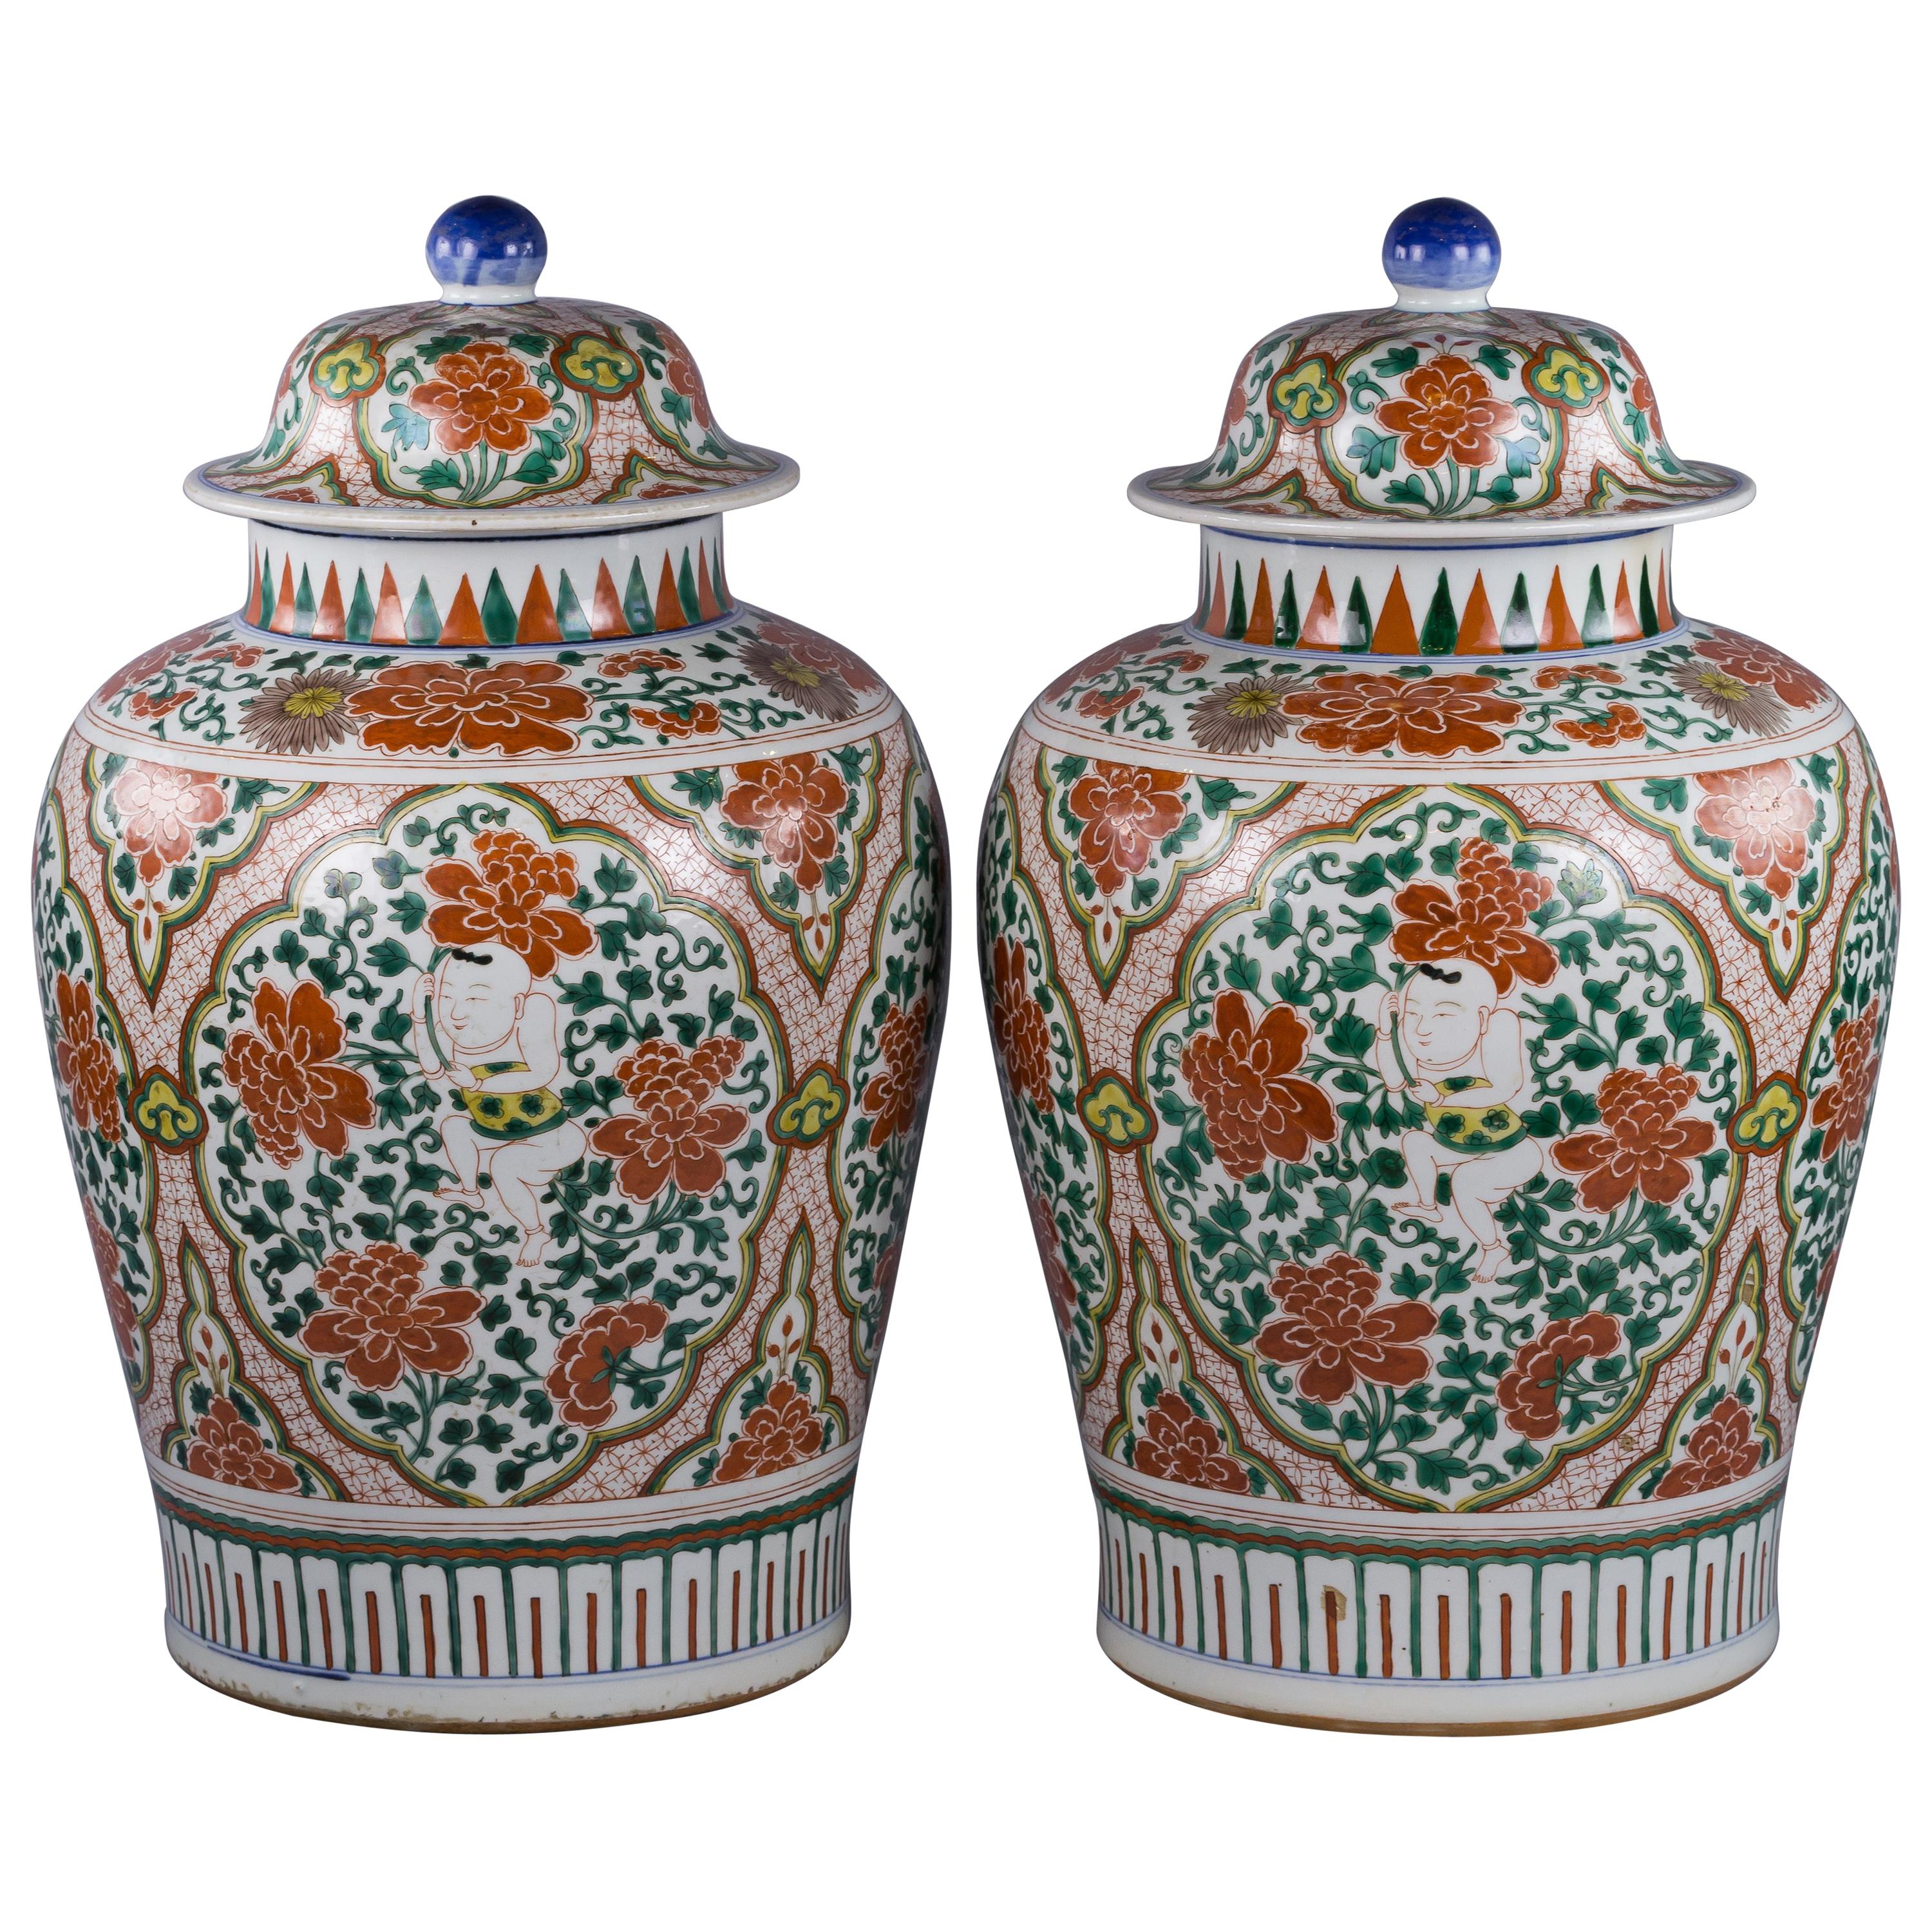 Large Pair of Chinese Porcelain Covered Jars, circa 1880